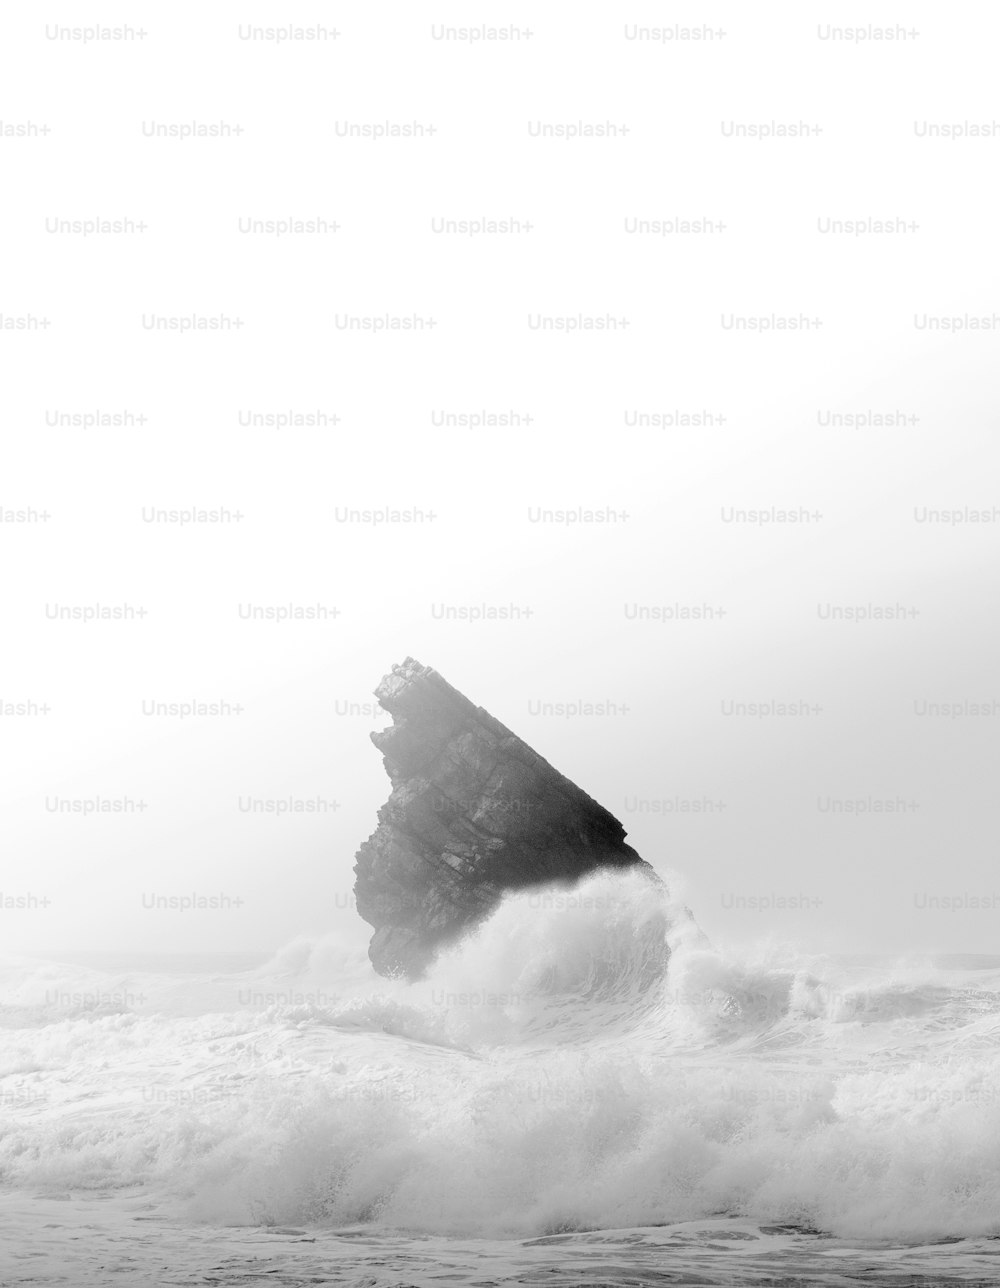 a black and white photo of a rock in the ocean